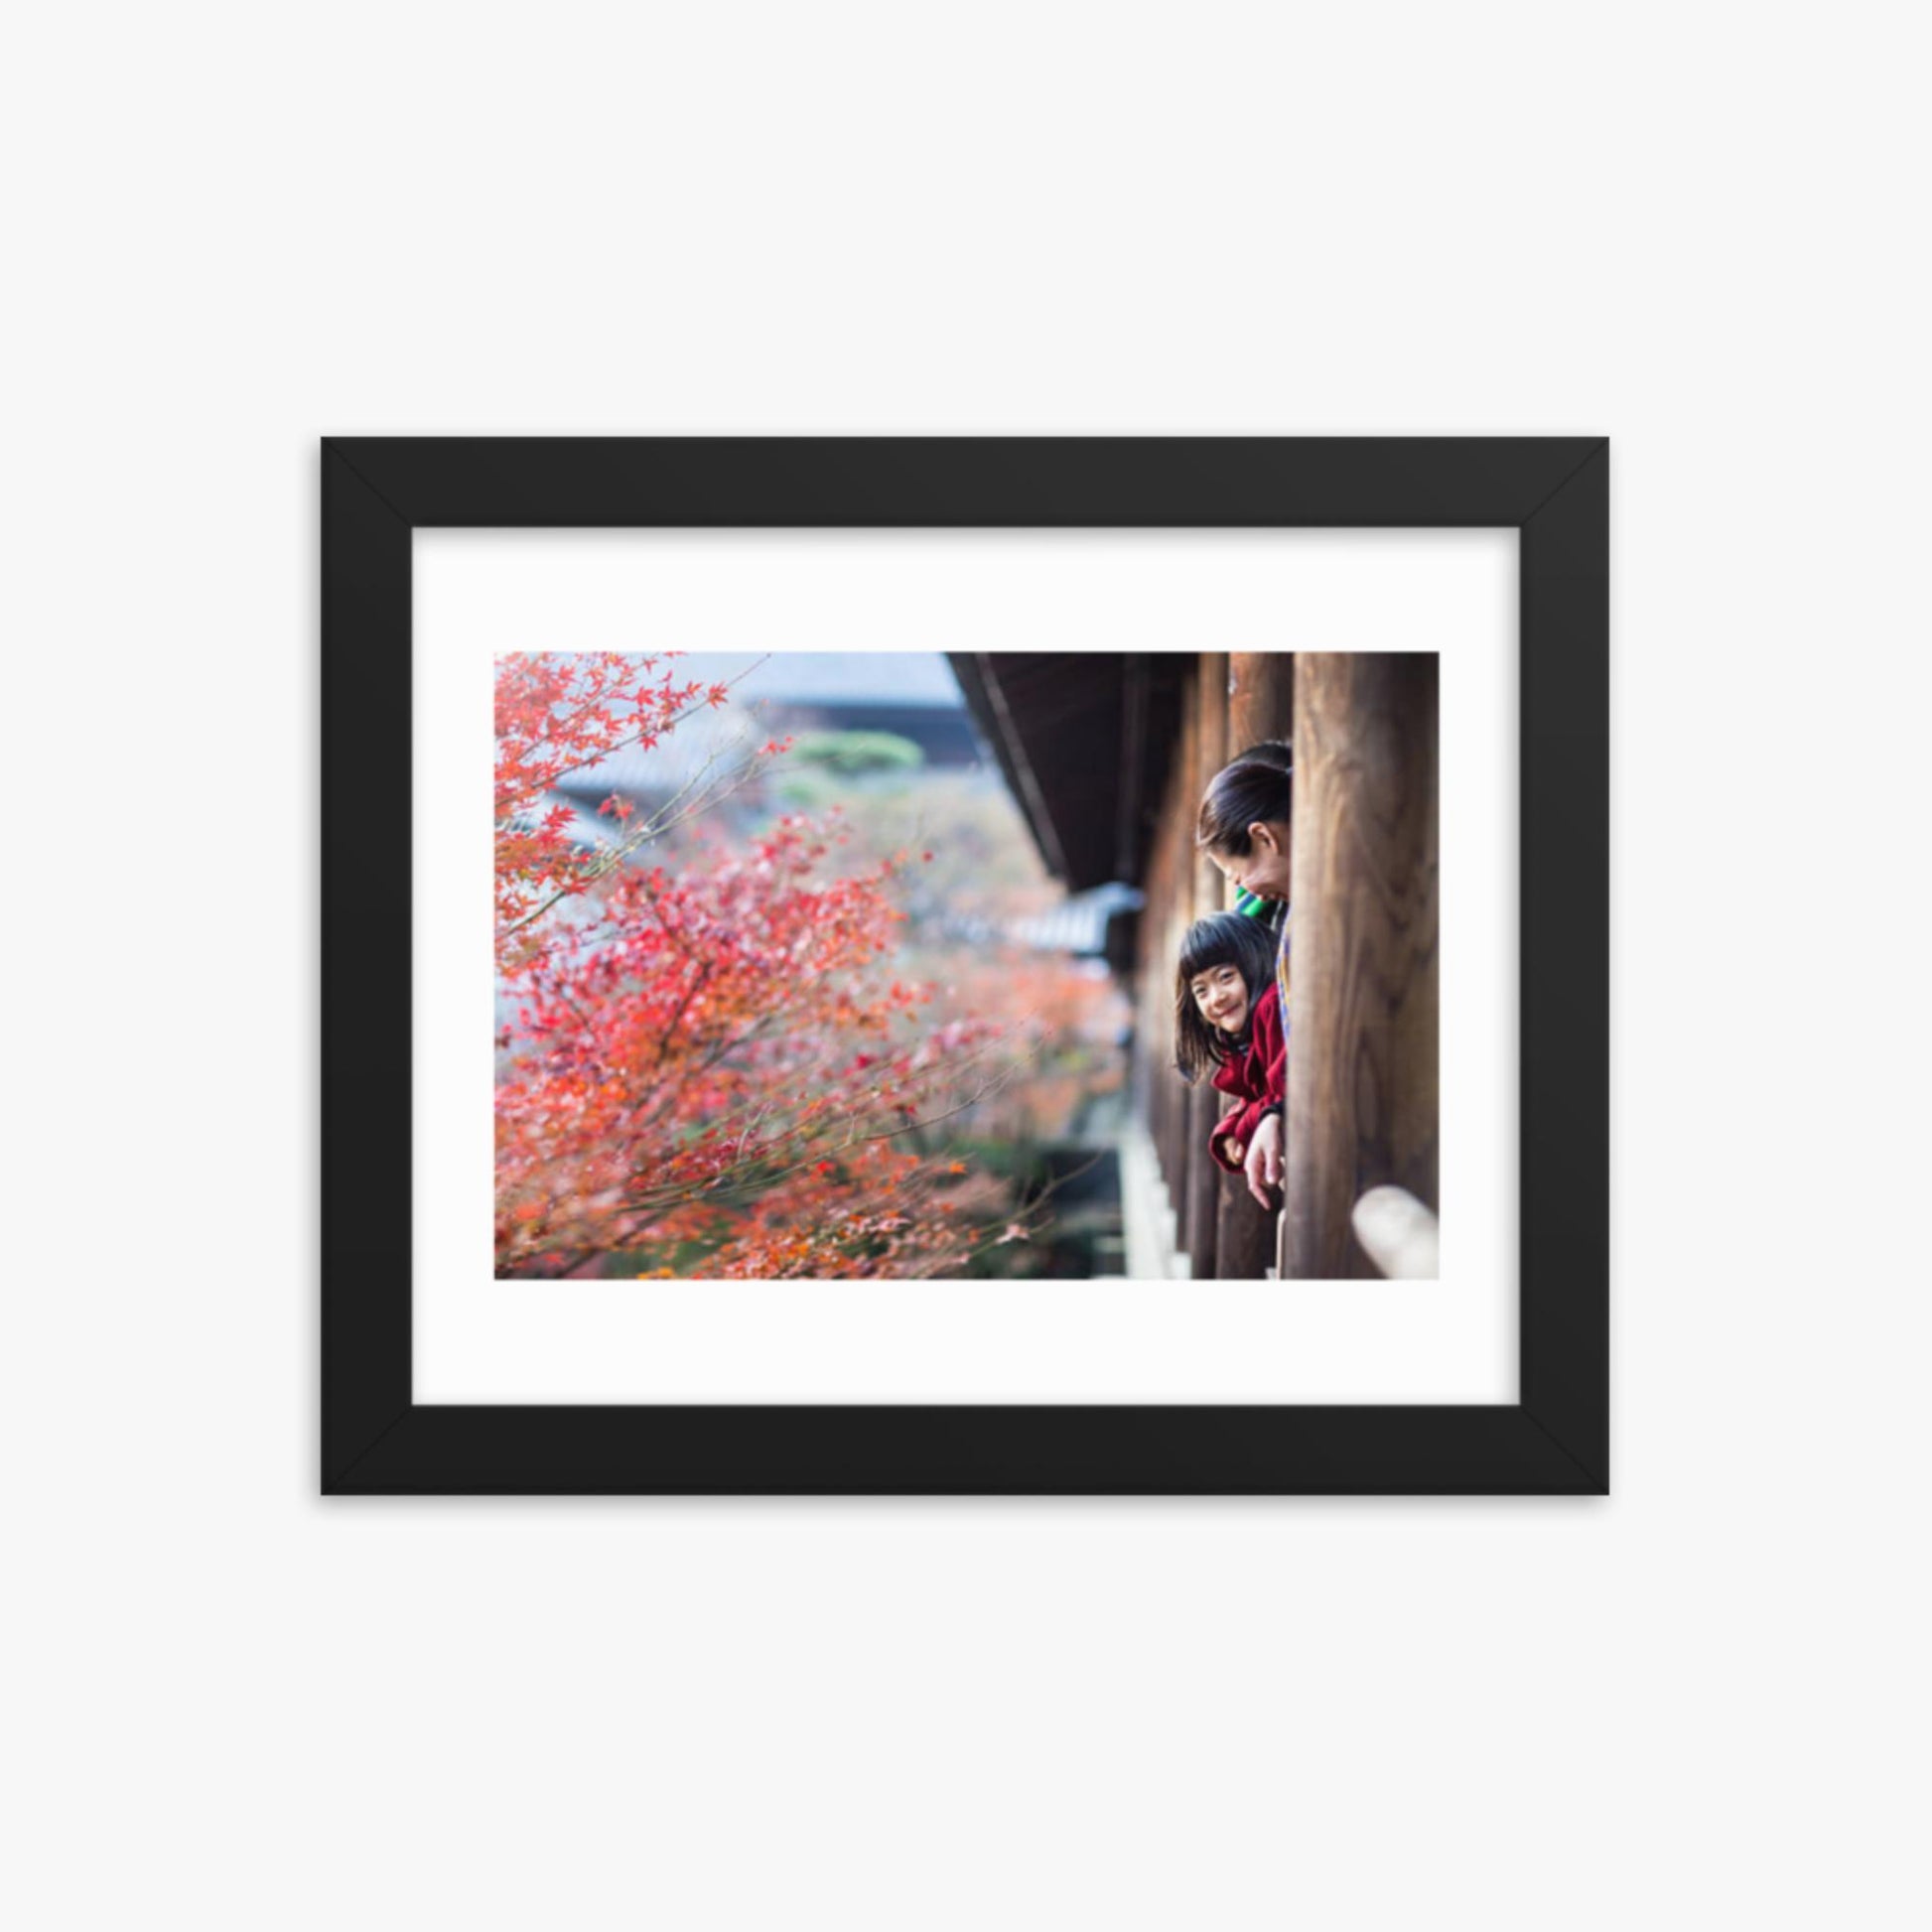 Father, mother and daughter at a temple enjoying autumn leaves 8x10 in Poster With Black Frame